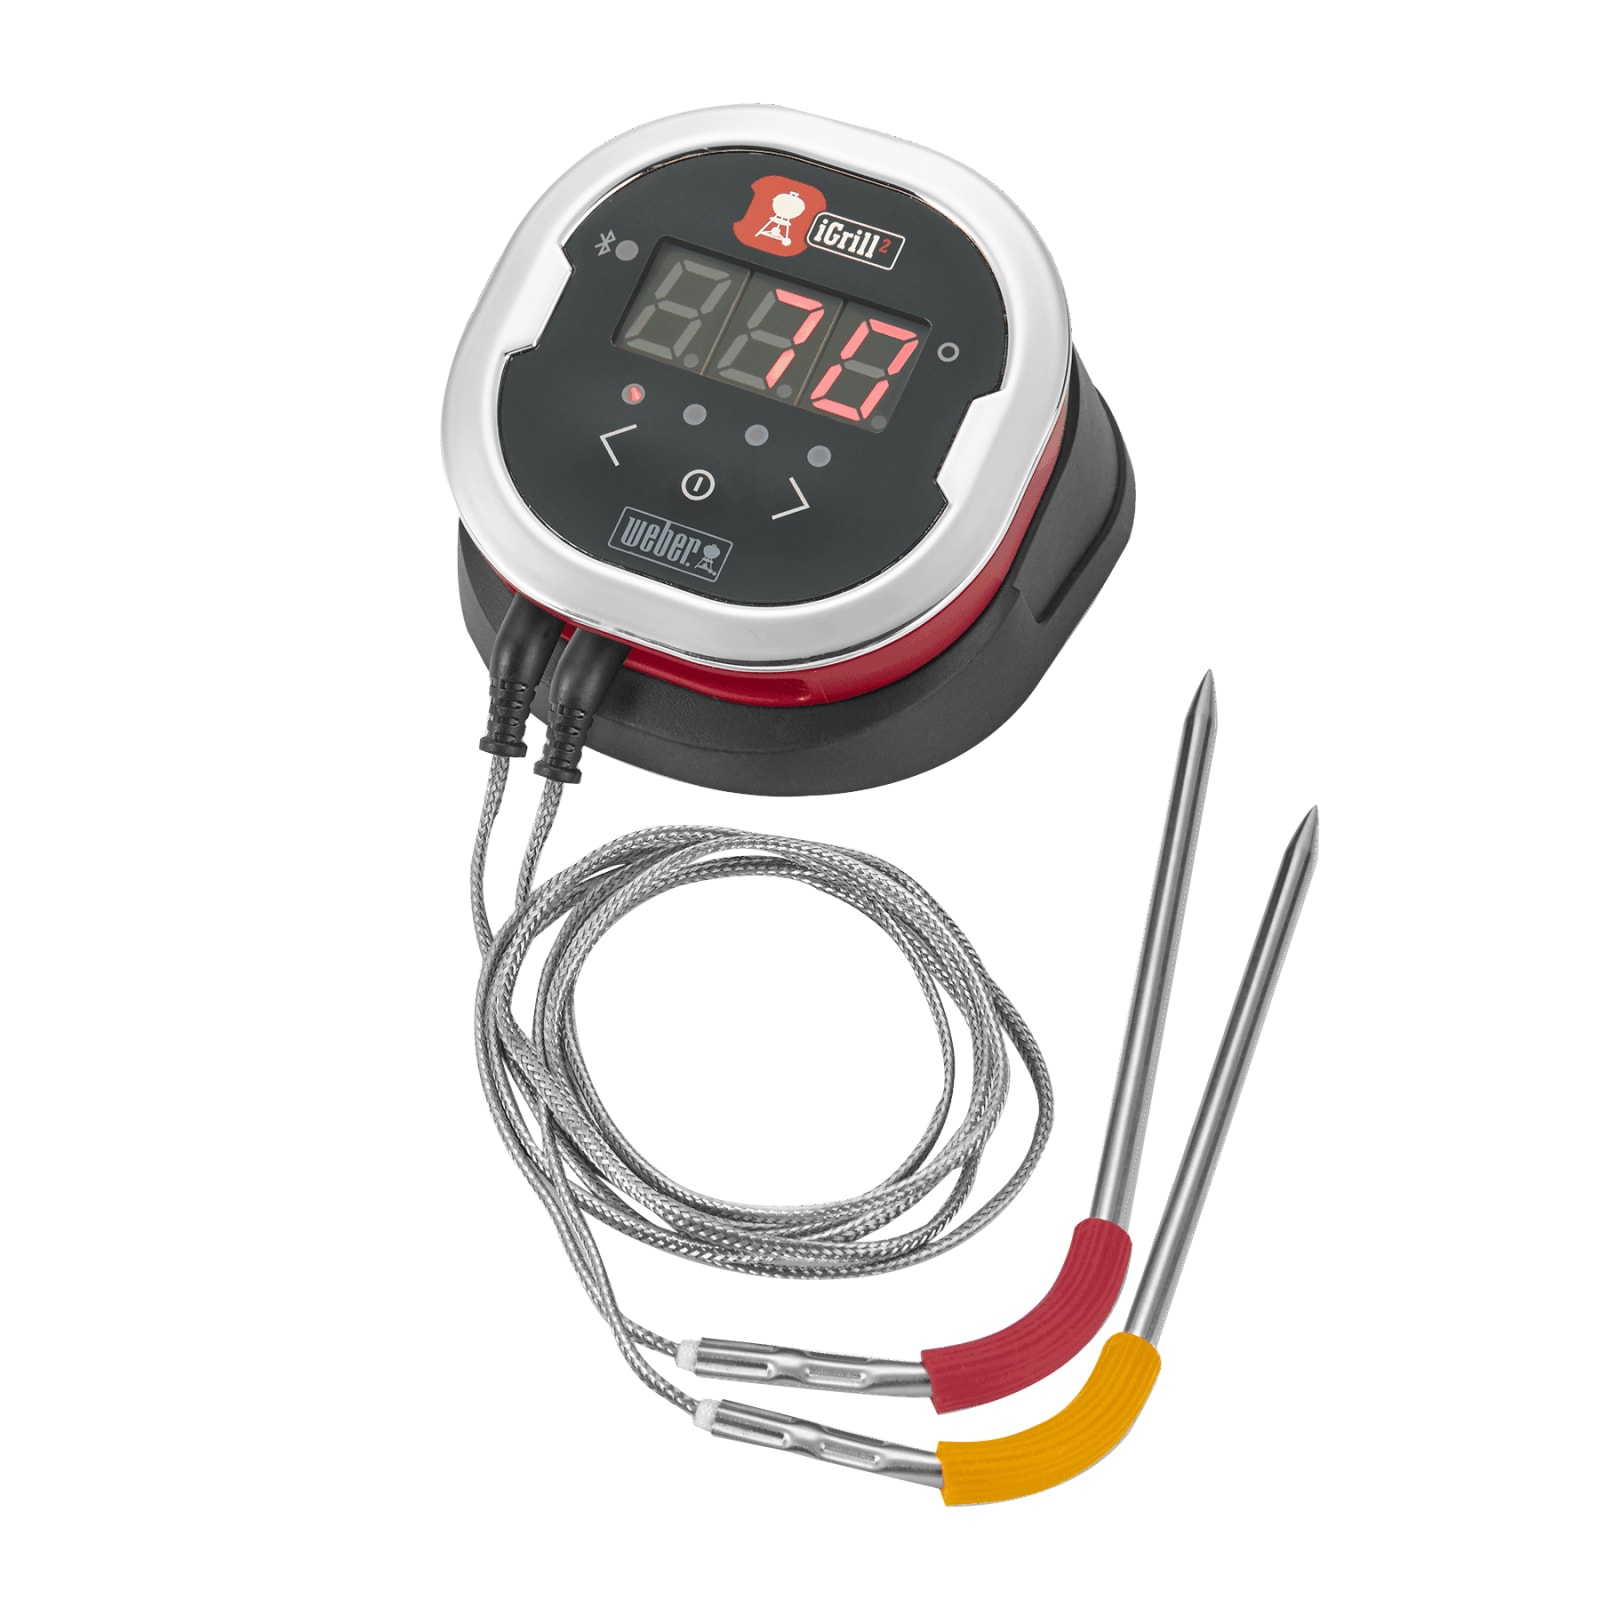  Weber iGrill 3 Grill Thermometer : Patio, Lawn & Garden